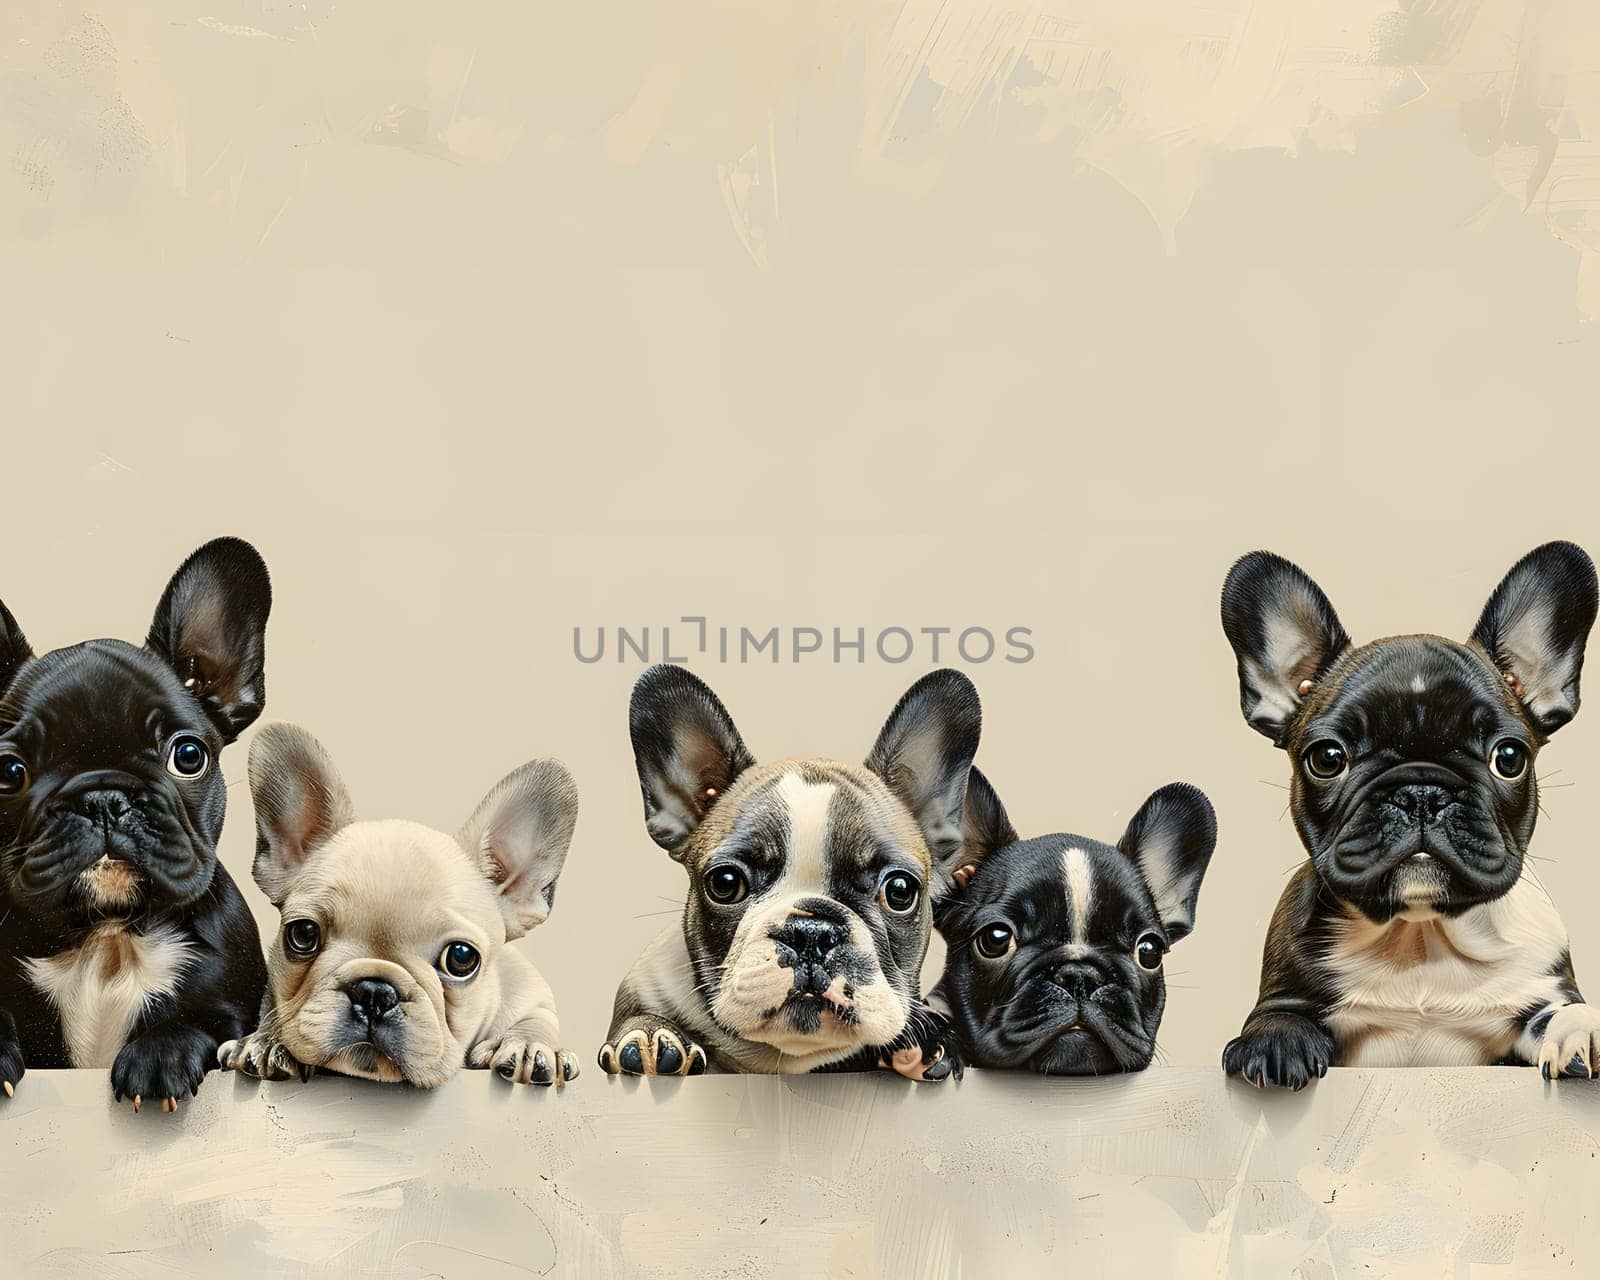 A row of French bulldogs, a toy dog breed, laying and looking at the camera by Nadtochiy